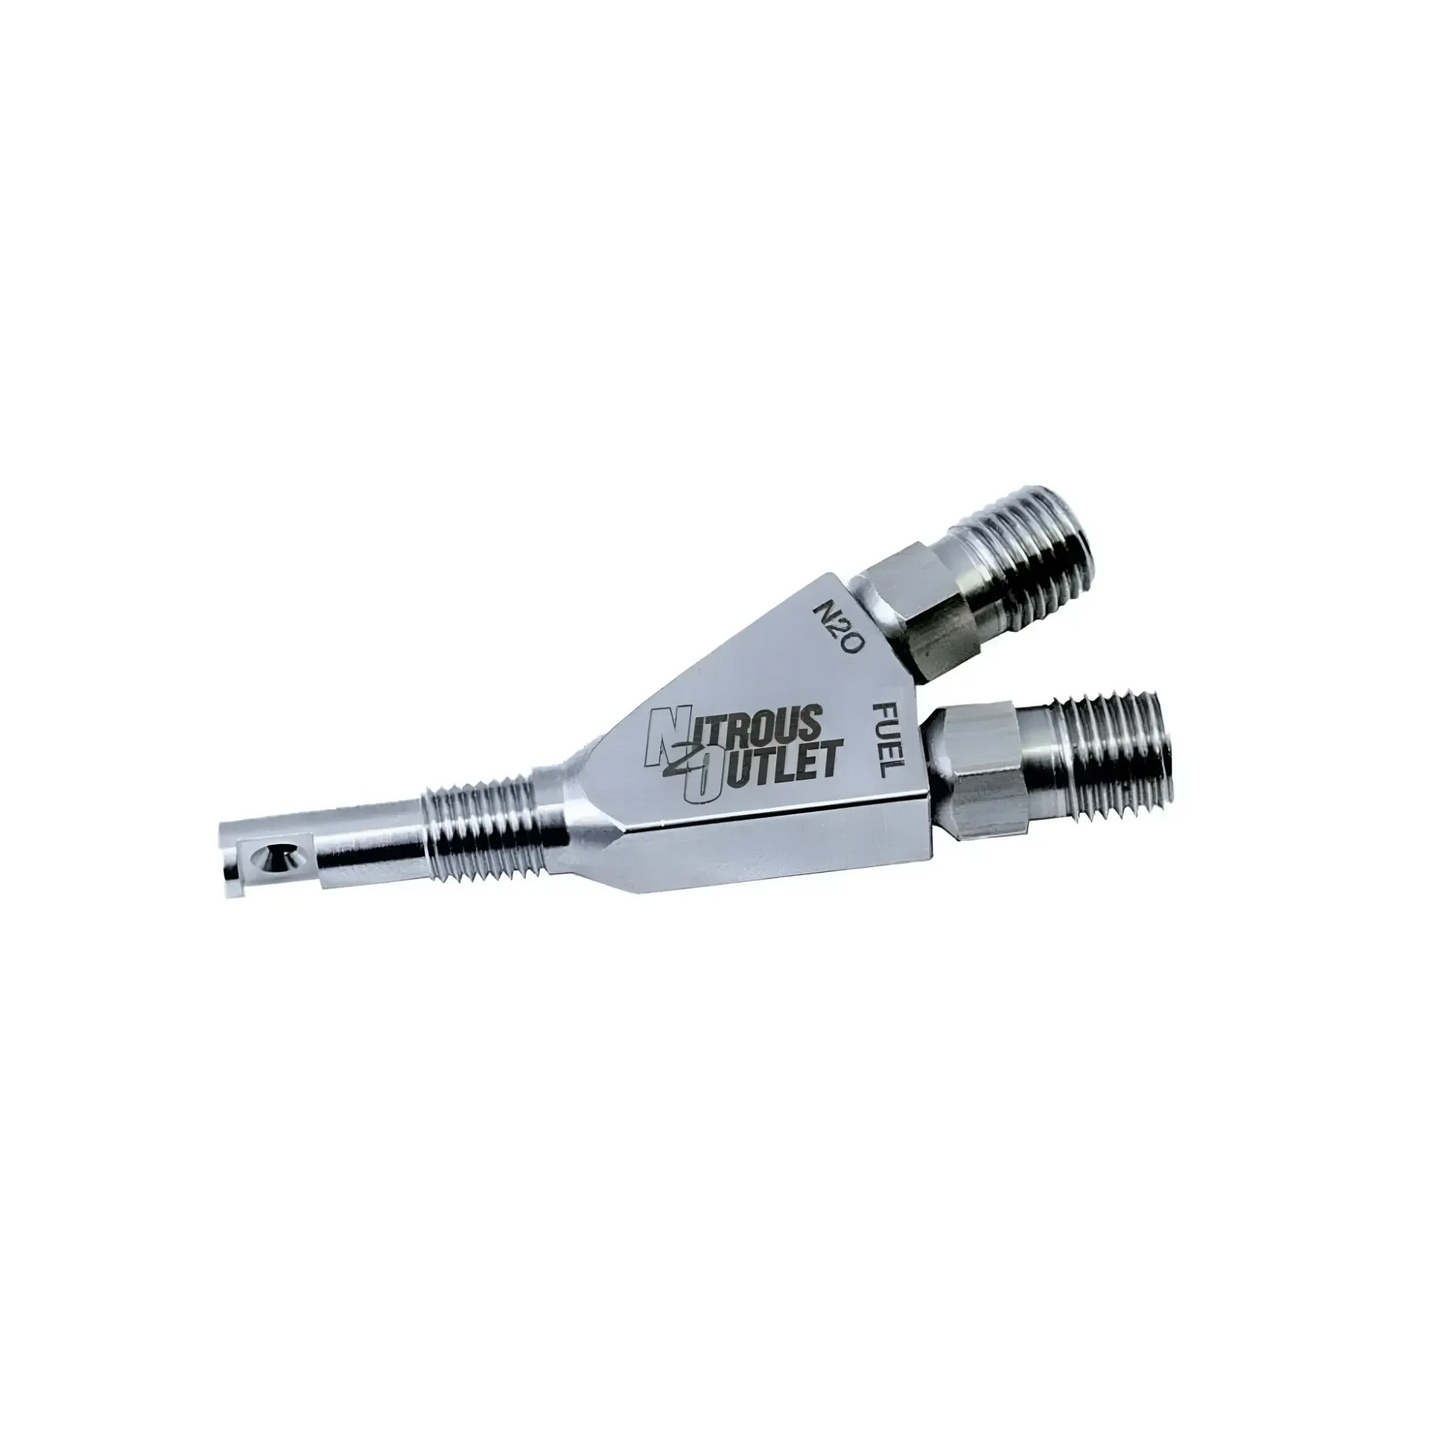 Stainless Steel 90° Discharge Nozzle - 4 Pack